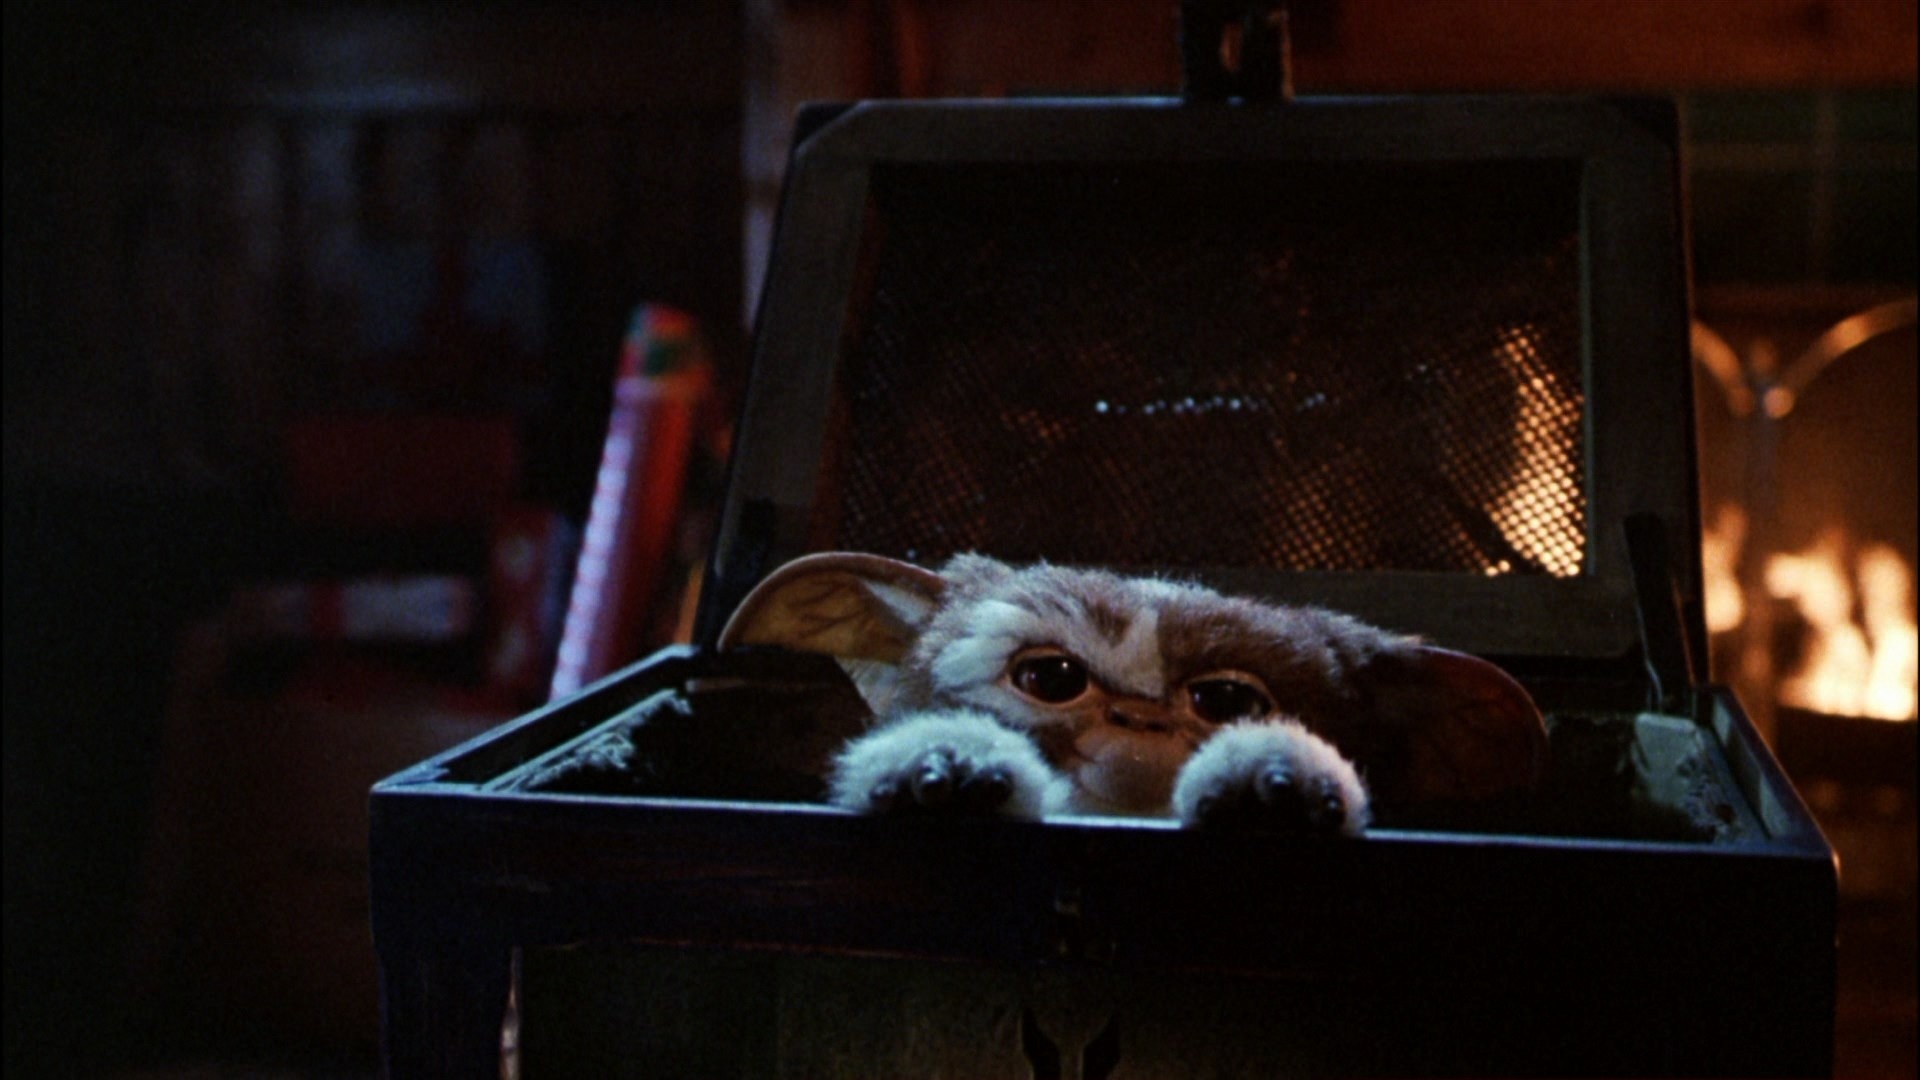 Gremlin Gizmo: Lives with Billy and Kate Peltzer in New York, Originally owned by Mr. Wing. 1920x1080 Full HD Wallpaper.